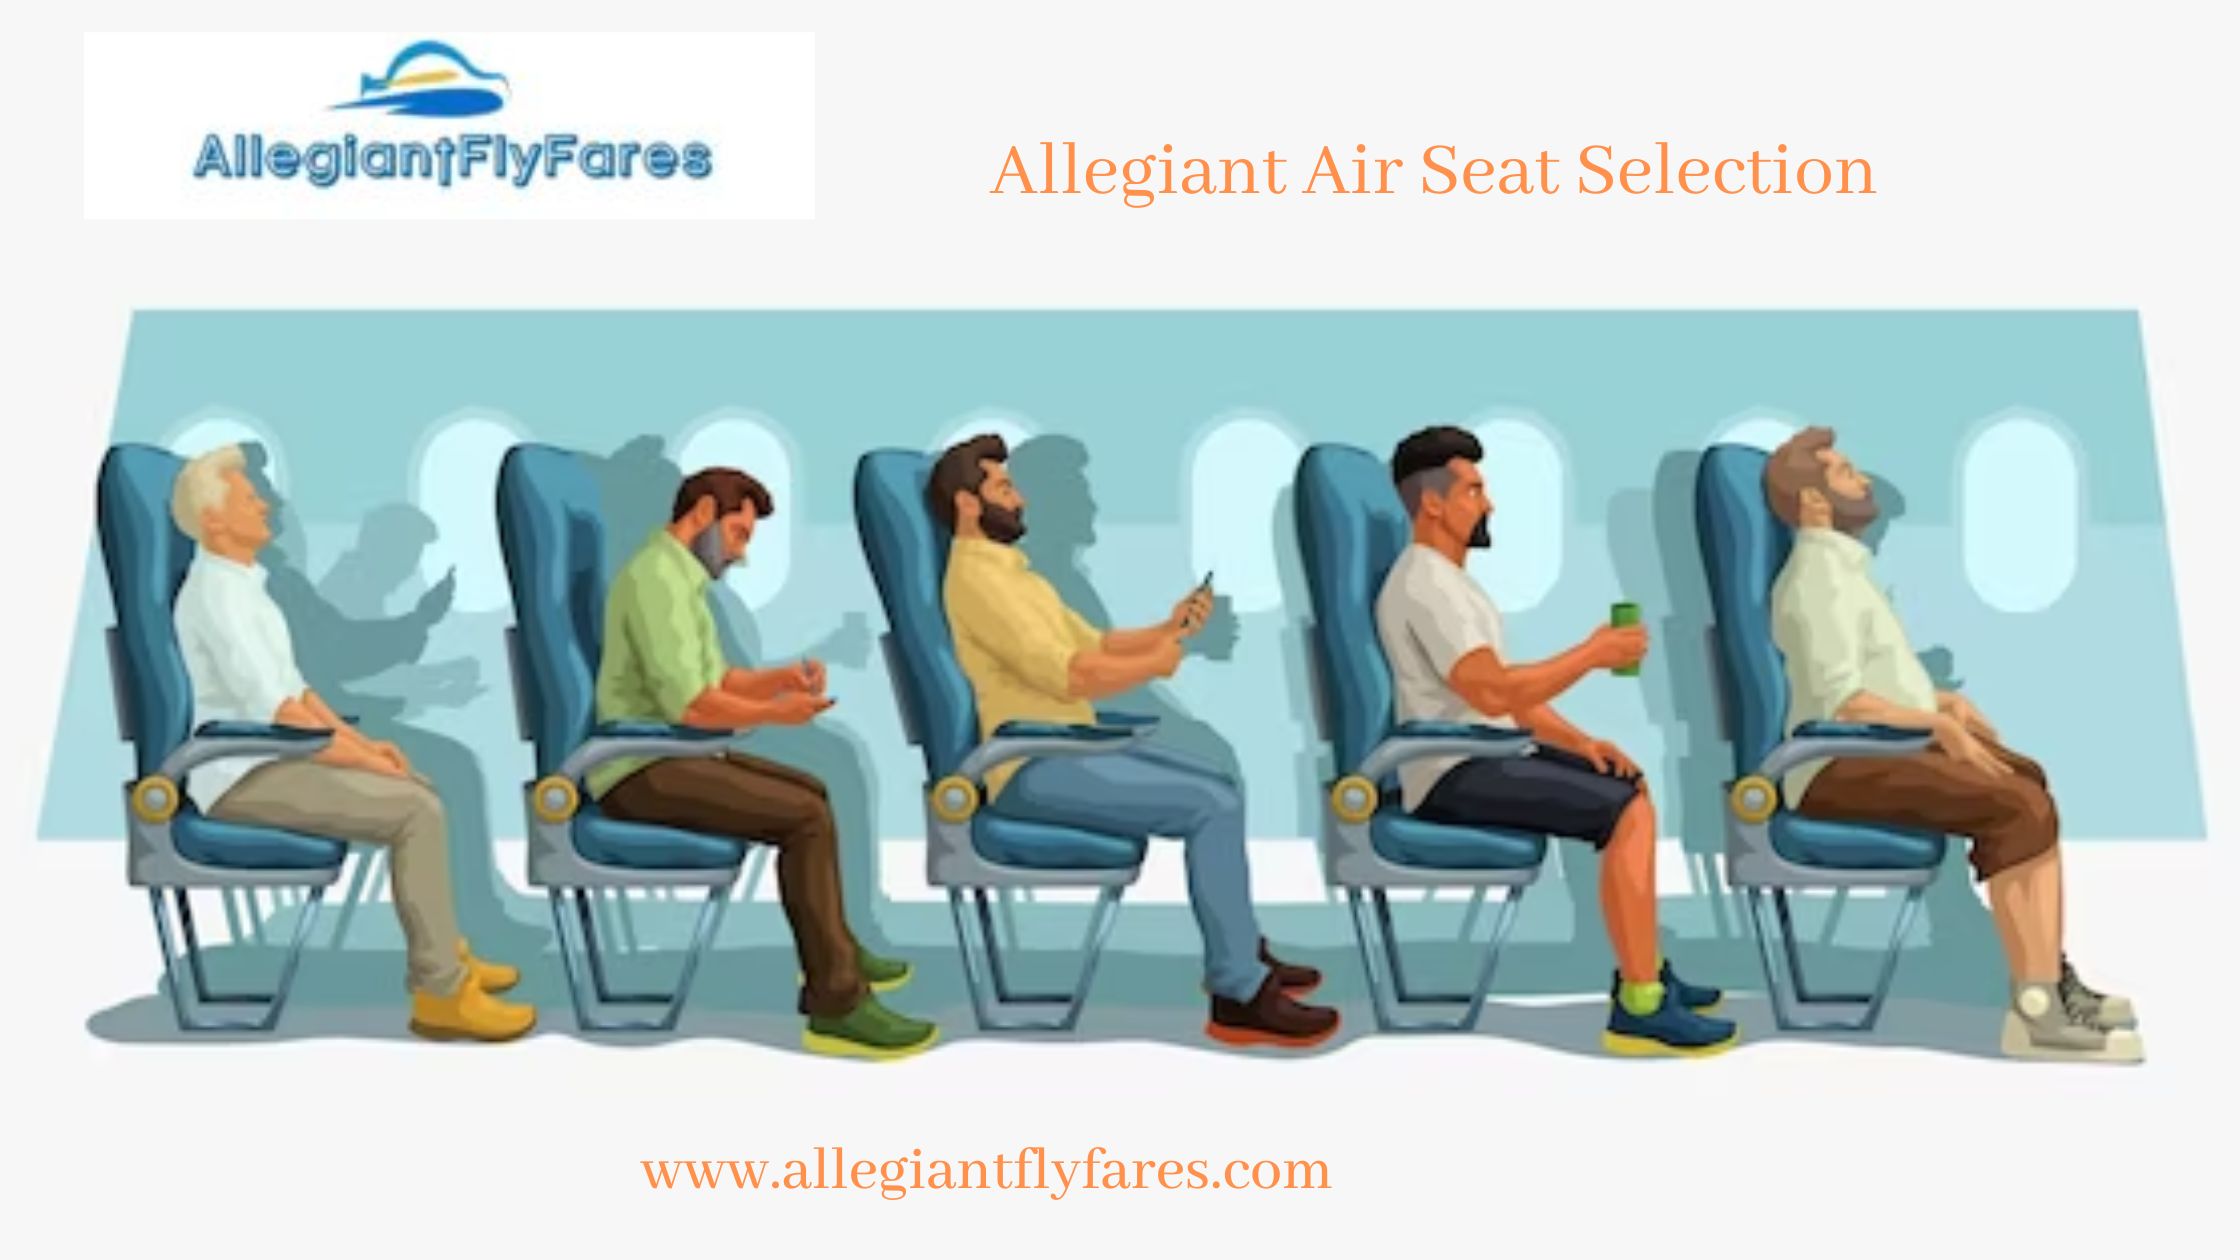 How to Select a Seat on Allegiant Air?